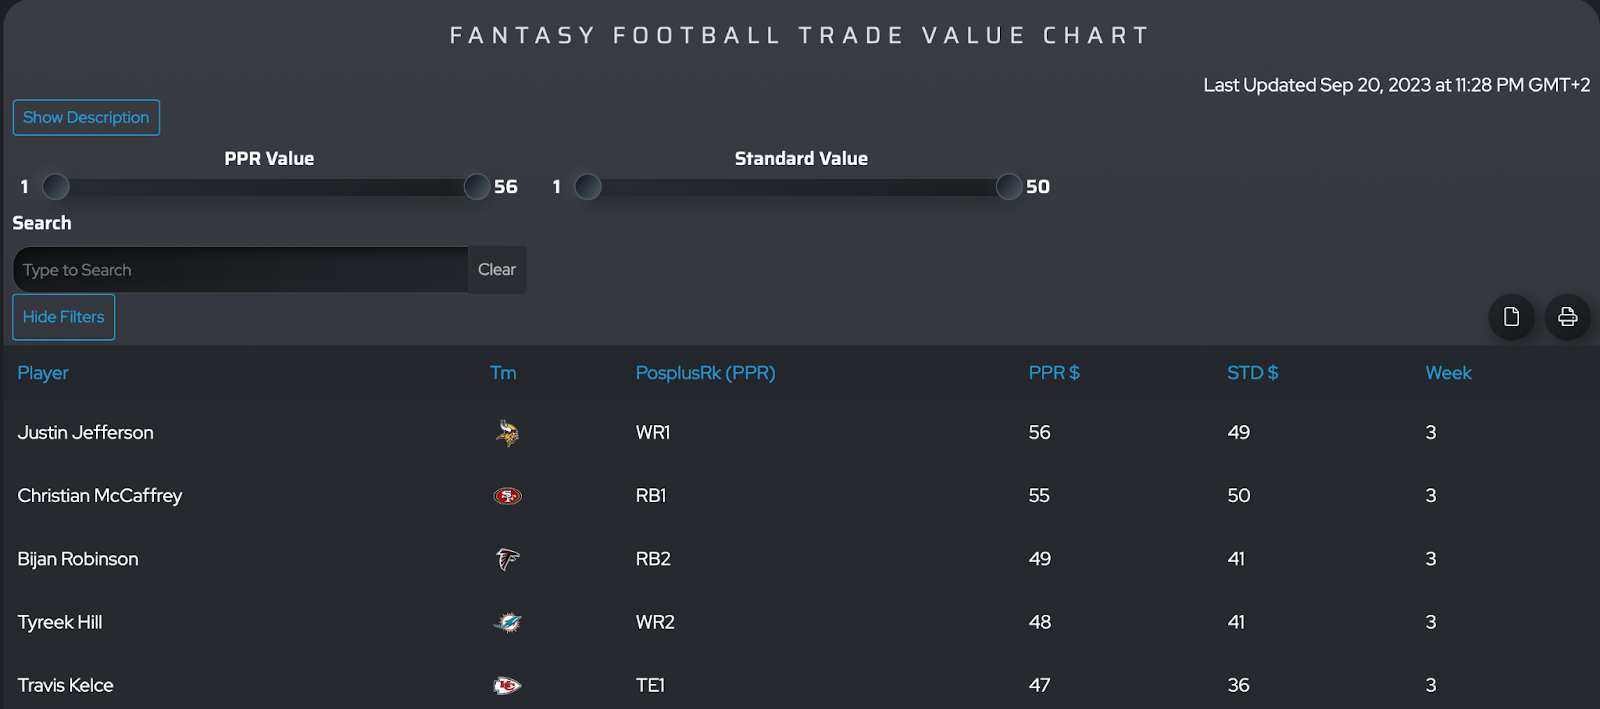 PFF's trade value chart for redraft fantasy football leagues